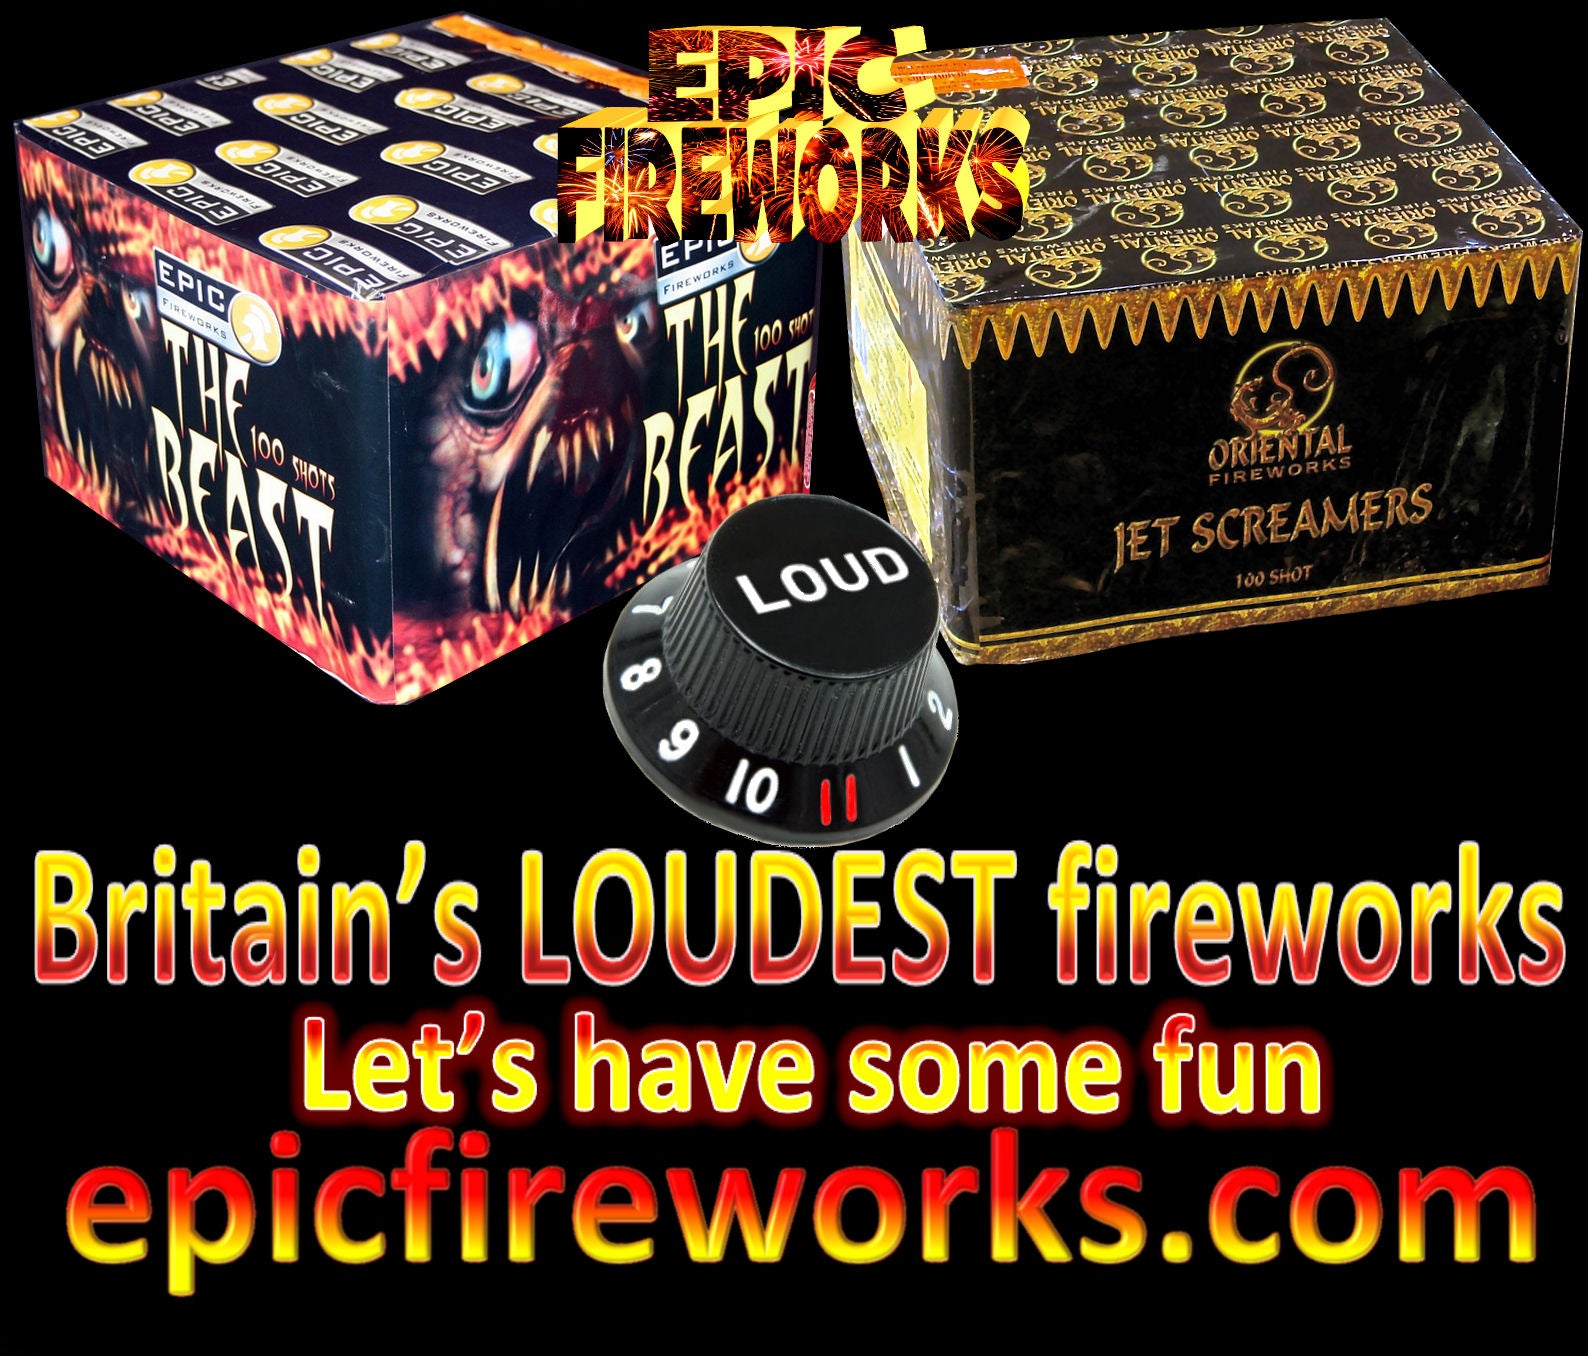 What is the Loudest Firework in Britain?